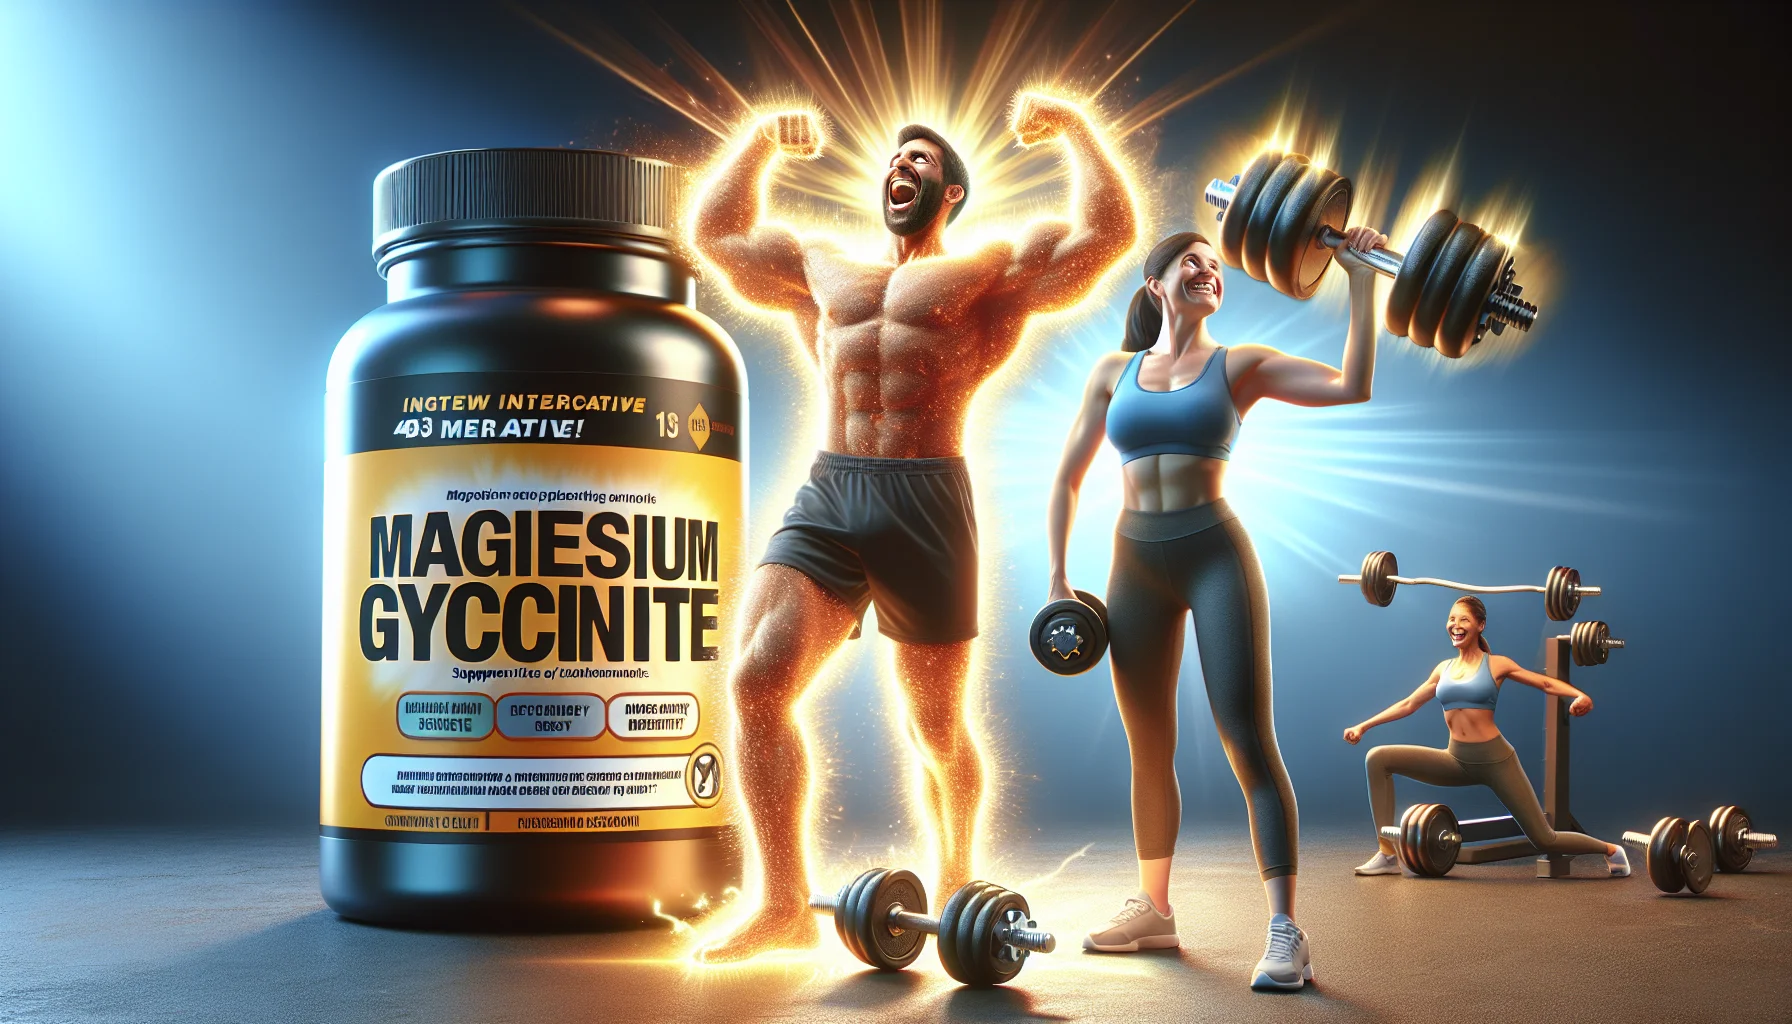 Generate an interactive image captured in a humorous light accentuating the benefits of magnesium glycinate supplements for sports enthusiasts. Show a closed bottle of magnesium glycinate supplements emanating an aura of energy. Next to it, depict a cartoon-like, playful muscular person of Hispanic descent with sports attire lifting weights. Have a gleeful Caucasian woman standing right beside, easily lifting a larger dumbbell with a vibrant glow around her, subtly indicating that she has been taking the supplements. The scene should subtly encompass the vitality and energy induced by the supplements. Please ensure all elements have a realistic touch.